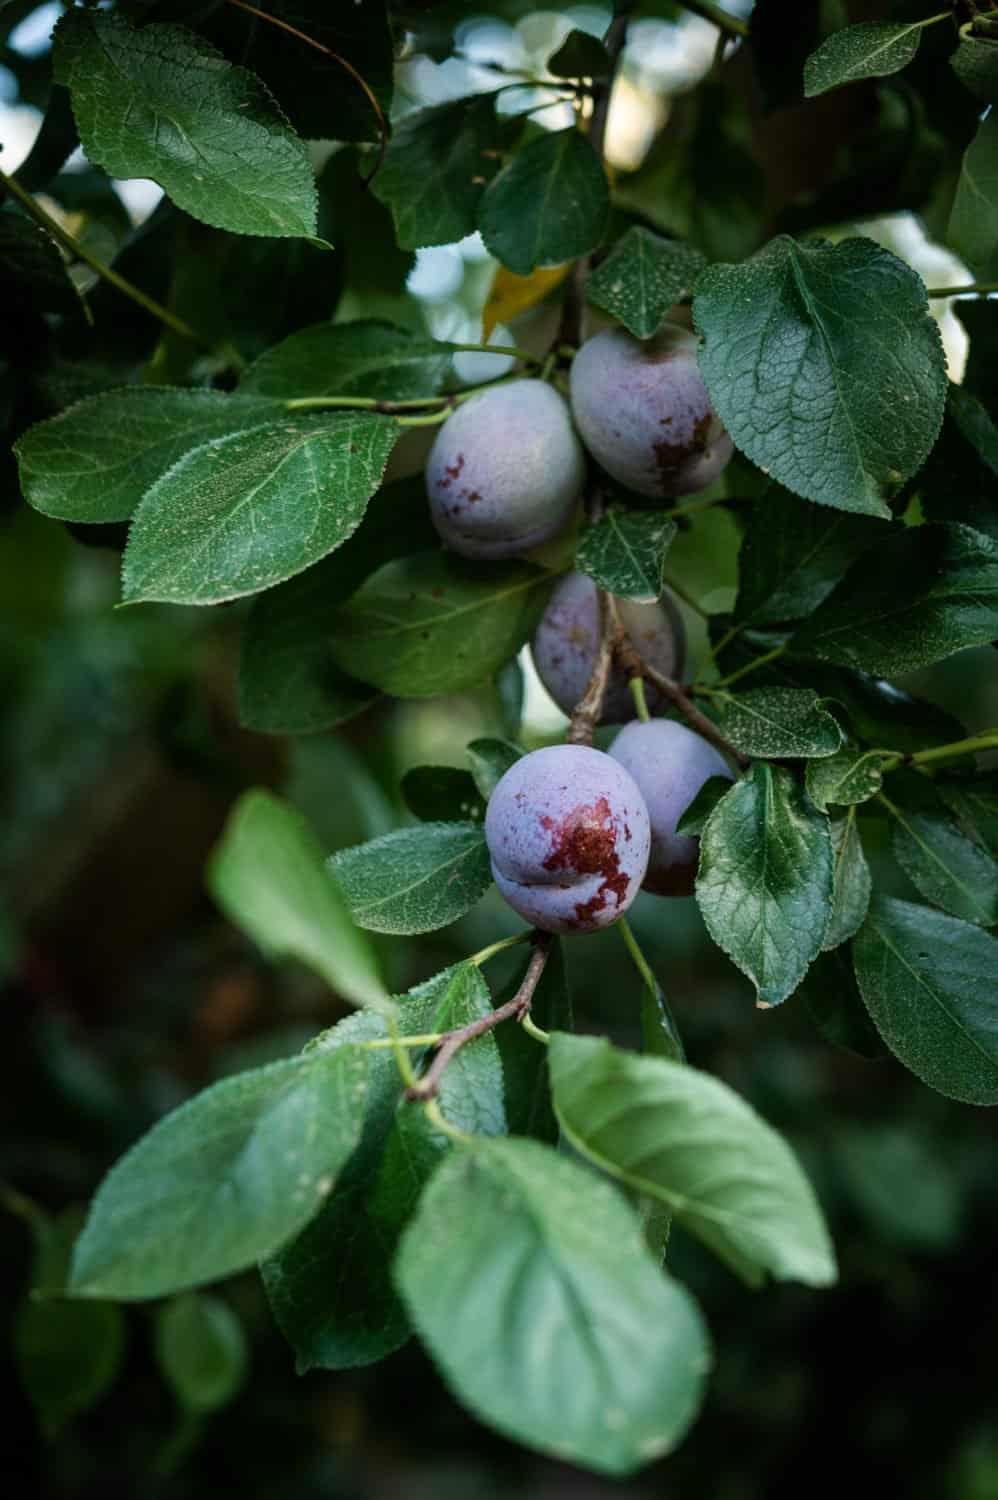 Ripe prune plums hanging from a tree branch